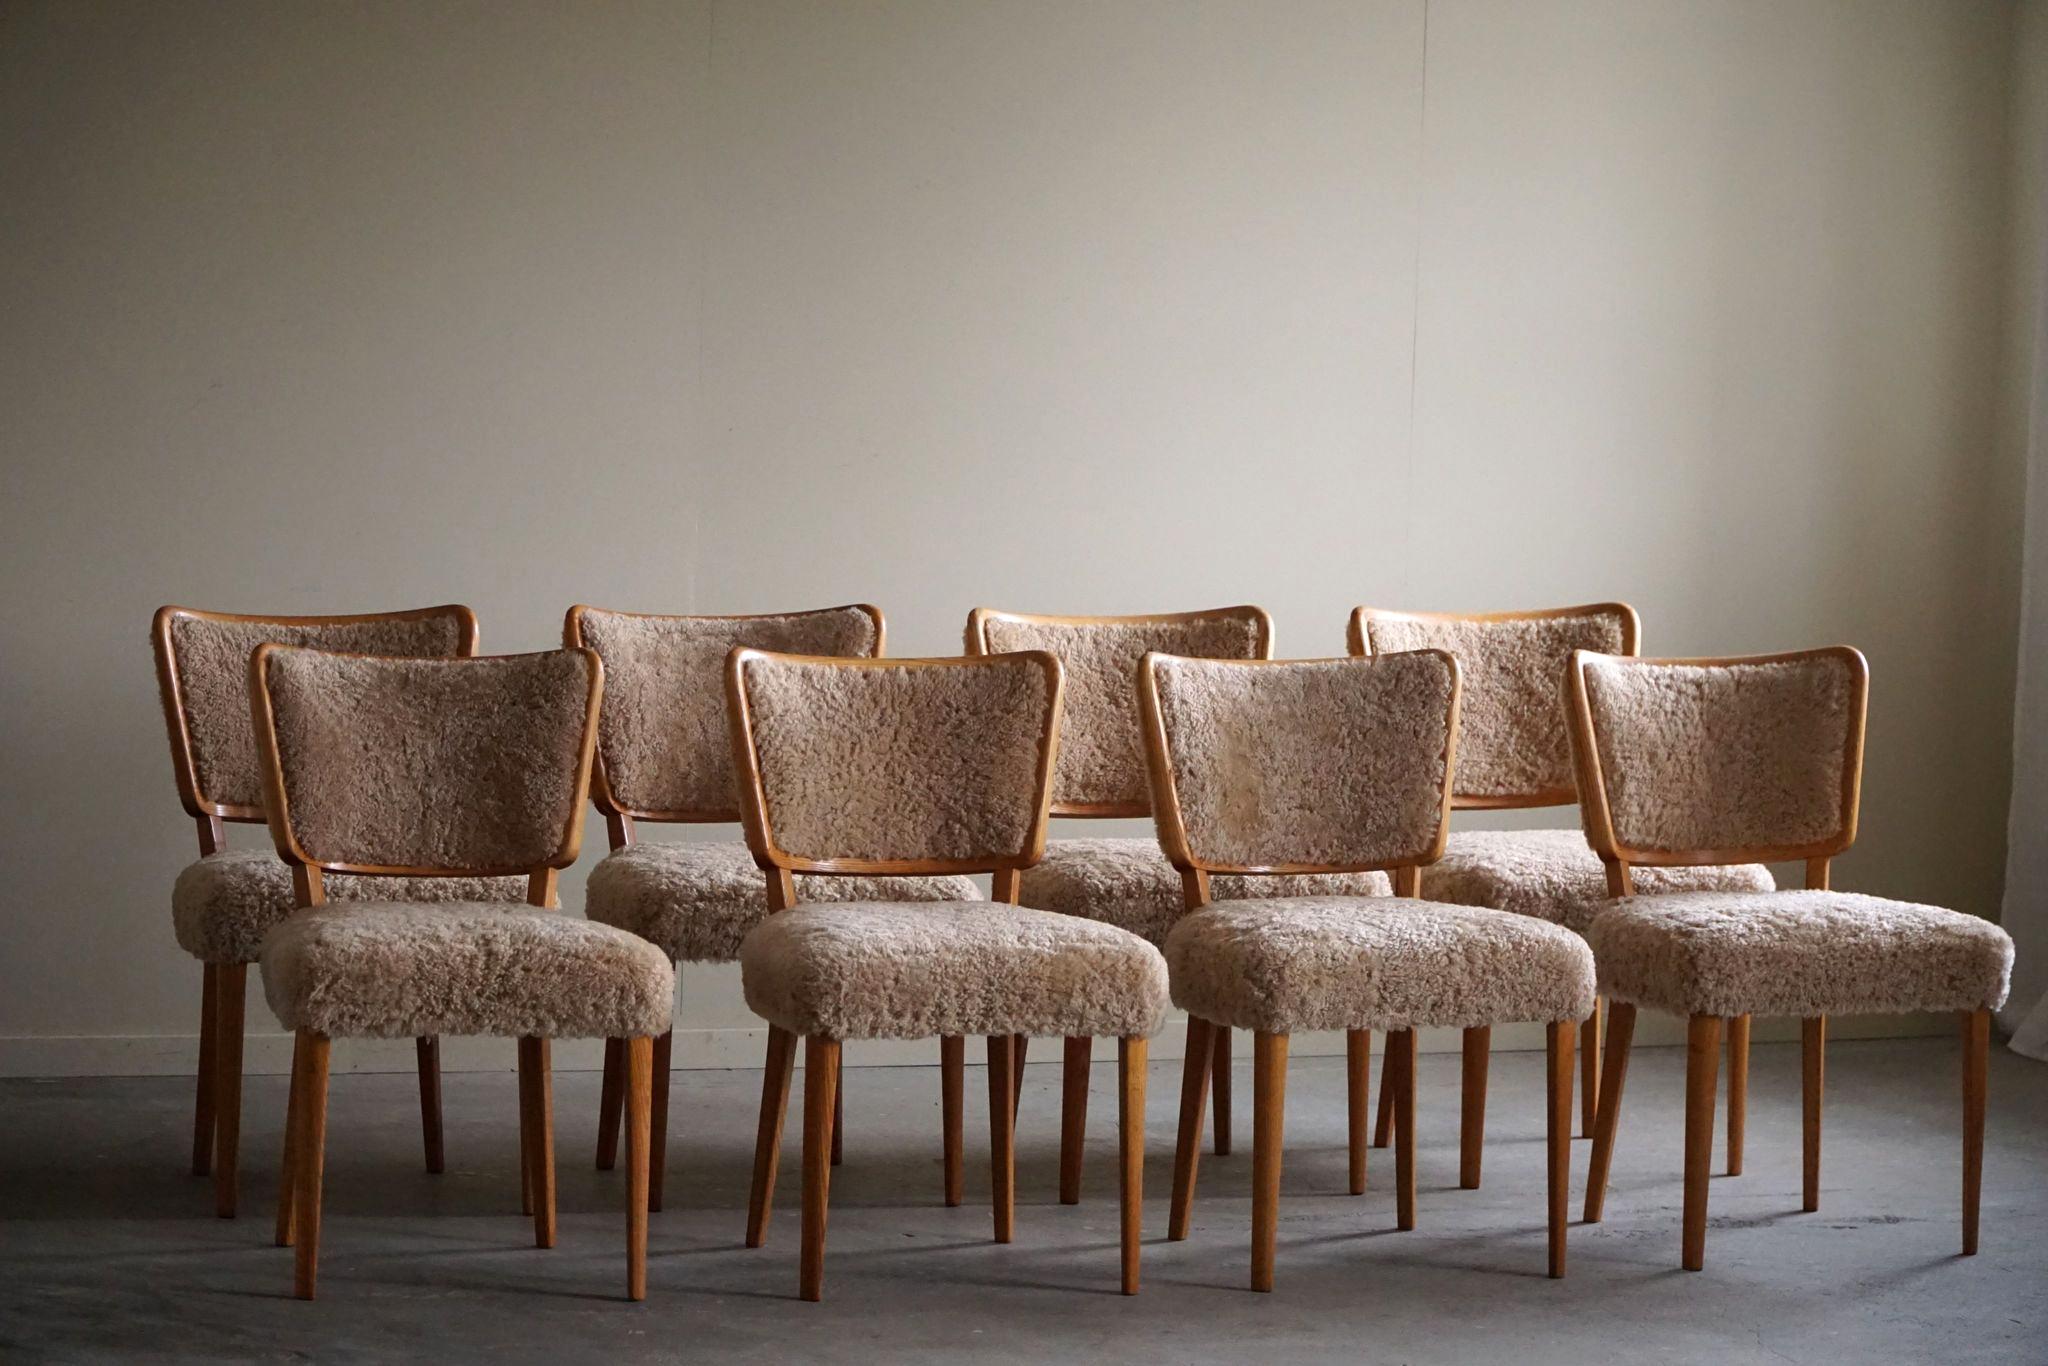 Swedish Modern, Set of 8 Dining Chairs, Lambswool & Elm, AB Malmö Kåpe, 1950s In Good Condition For Sale In Odense, DK